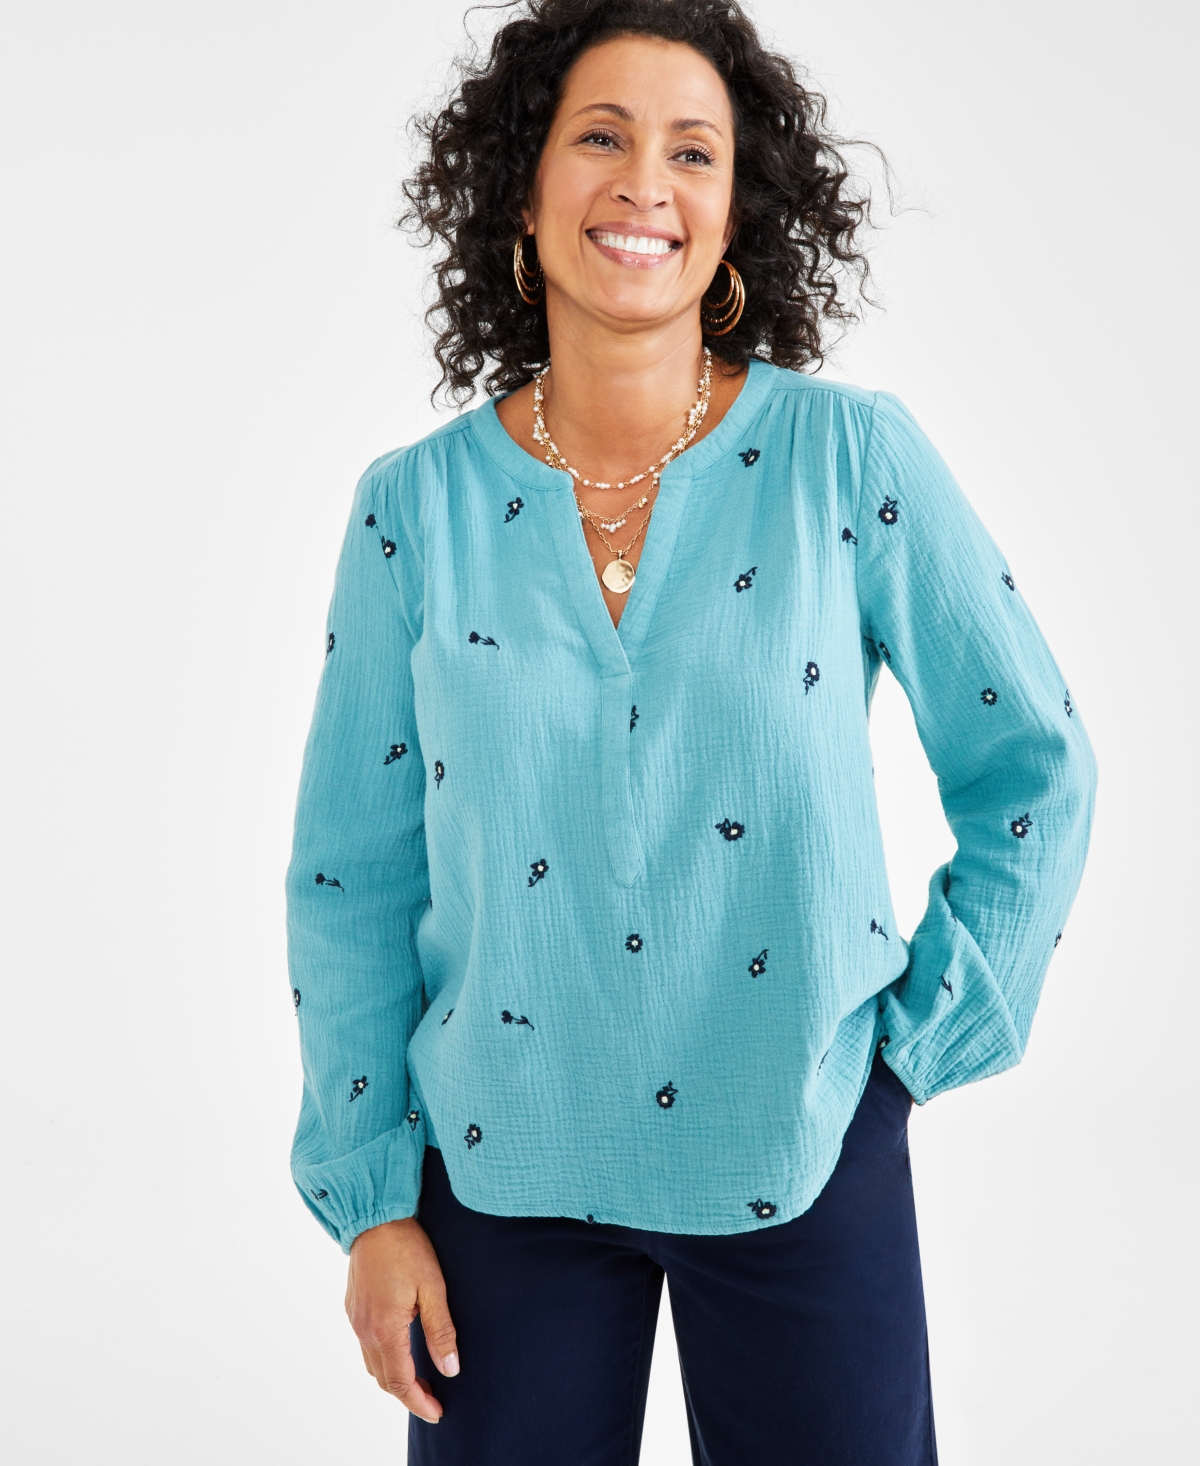 Women's Cotton Embroidered Split-Neck Gauze Blouse, Created for Macy's - Floral Teal